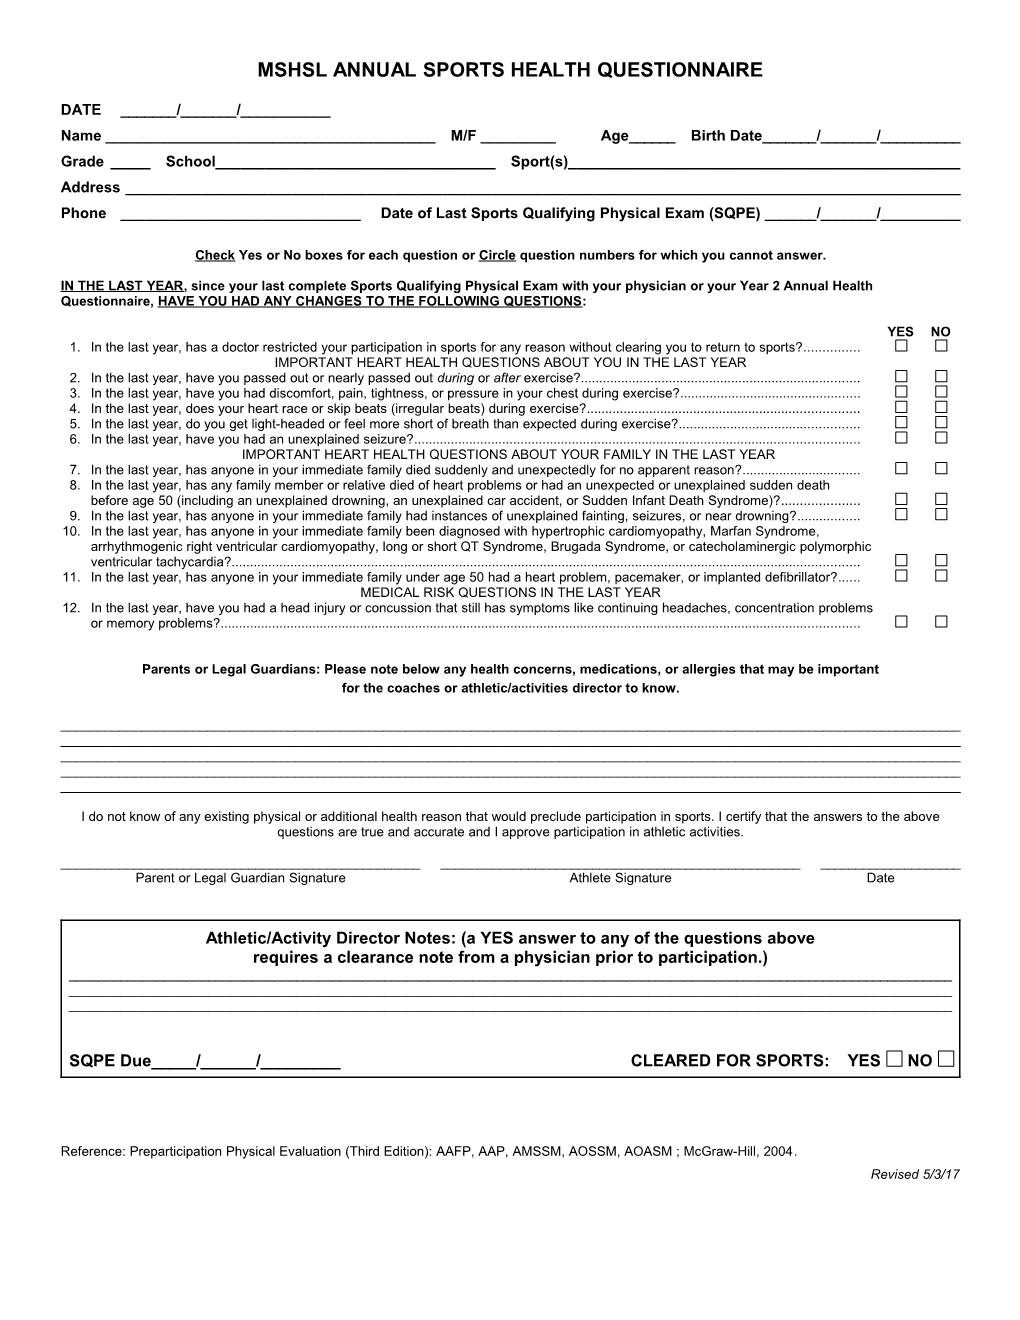 Mshsl Annual Sports Health Questionnaire Form